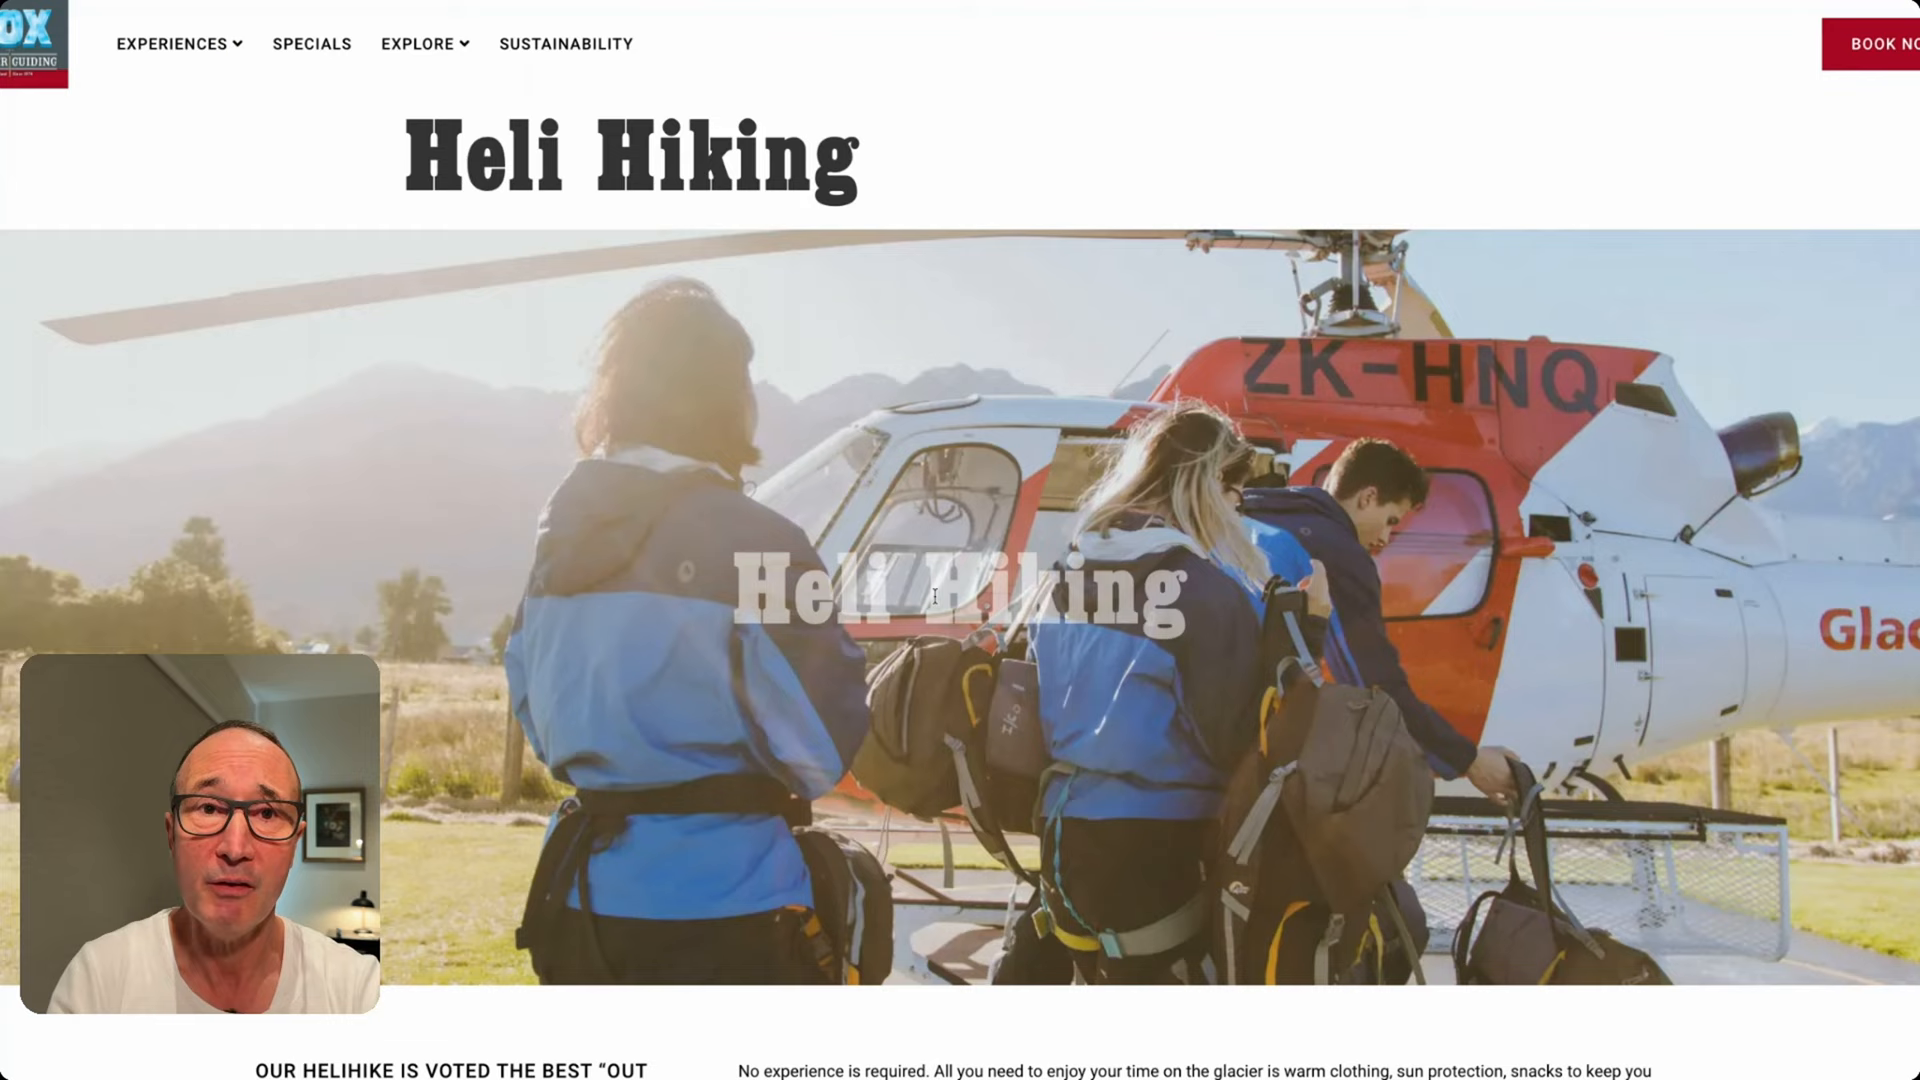 Heli-hiking guided tours run from Fox Glacier or Franz Josef villages